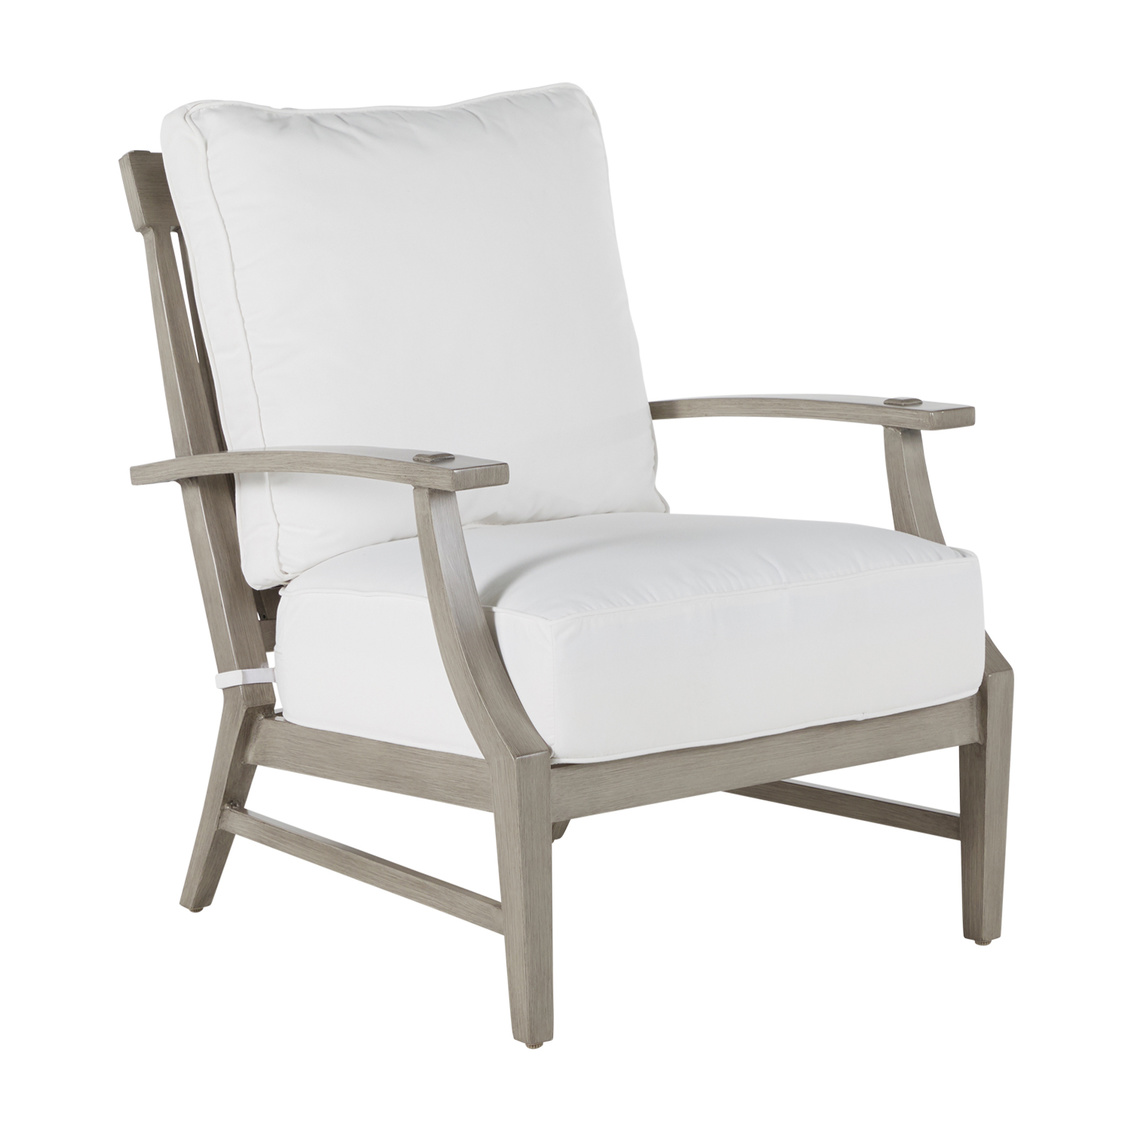 croquet aluminum lounge chair in oyster – frame only product image